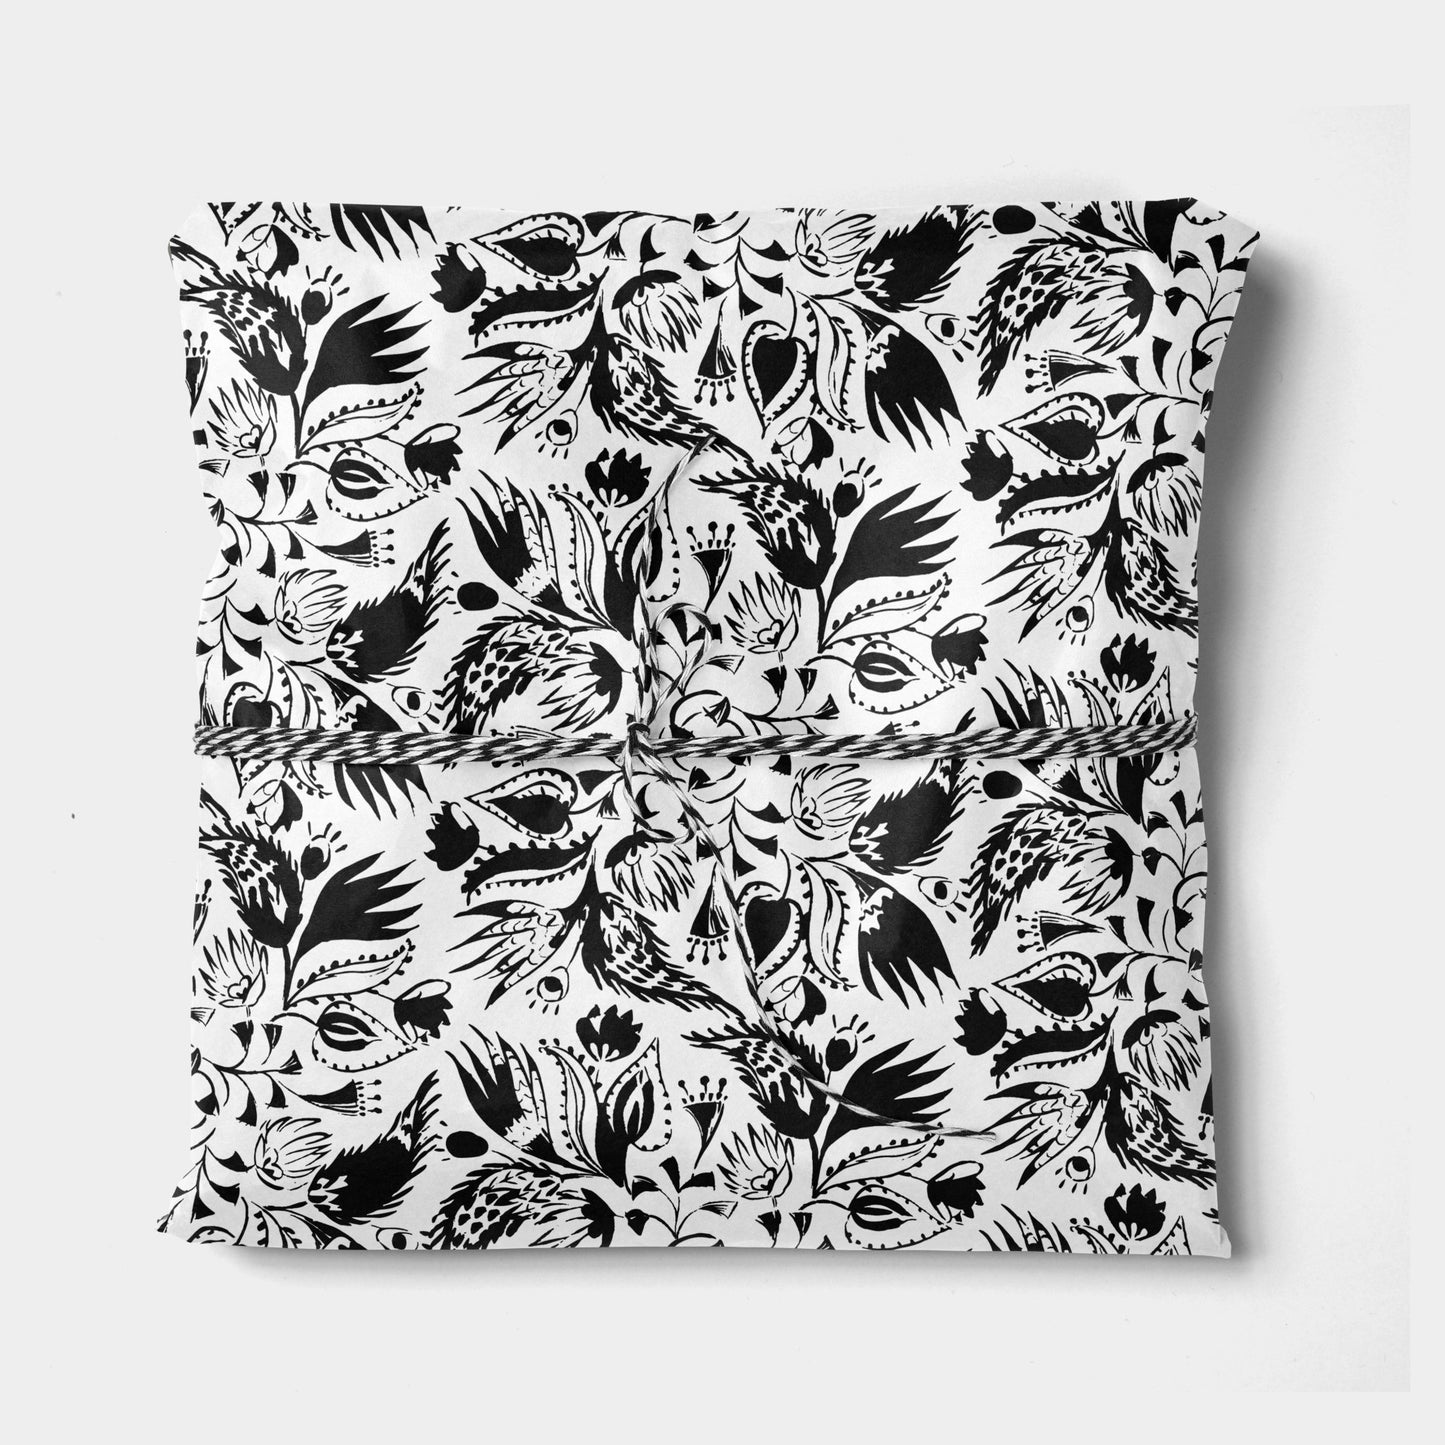 Black and White Illustrated Floral Lace Gift Wrap The Design Craft